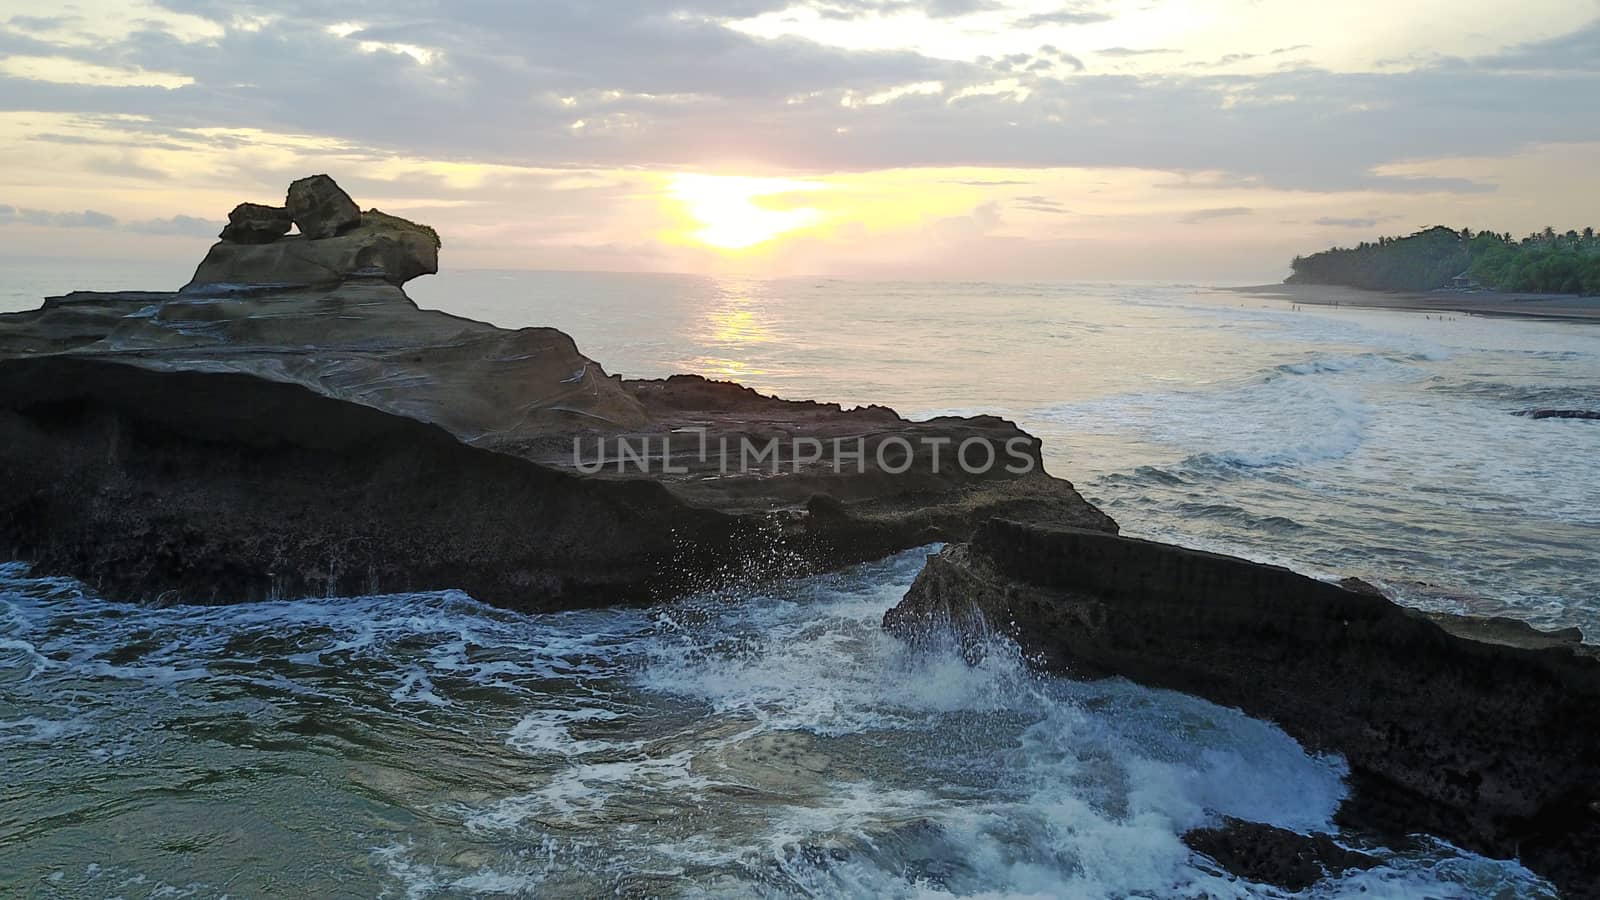 Sunset over the ocean. View of large waves breaking on the rocks. Clouds hang over the horizon. A ray from the sun is reflected on the water in orange color. The coast of Bali is visible.